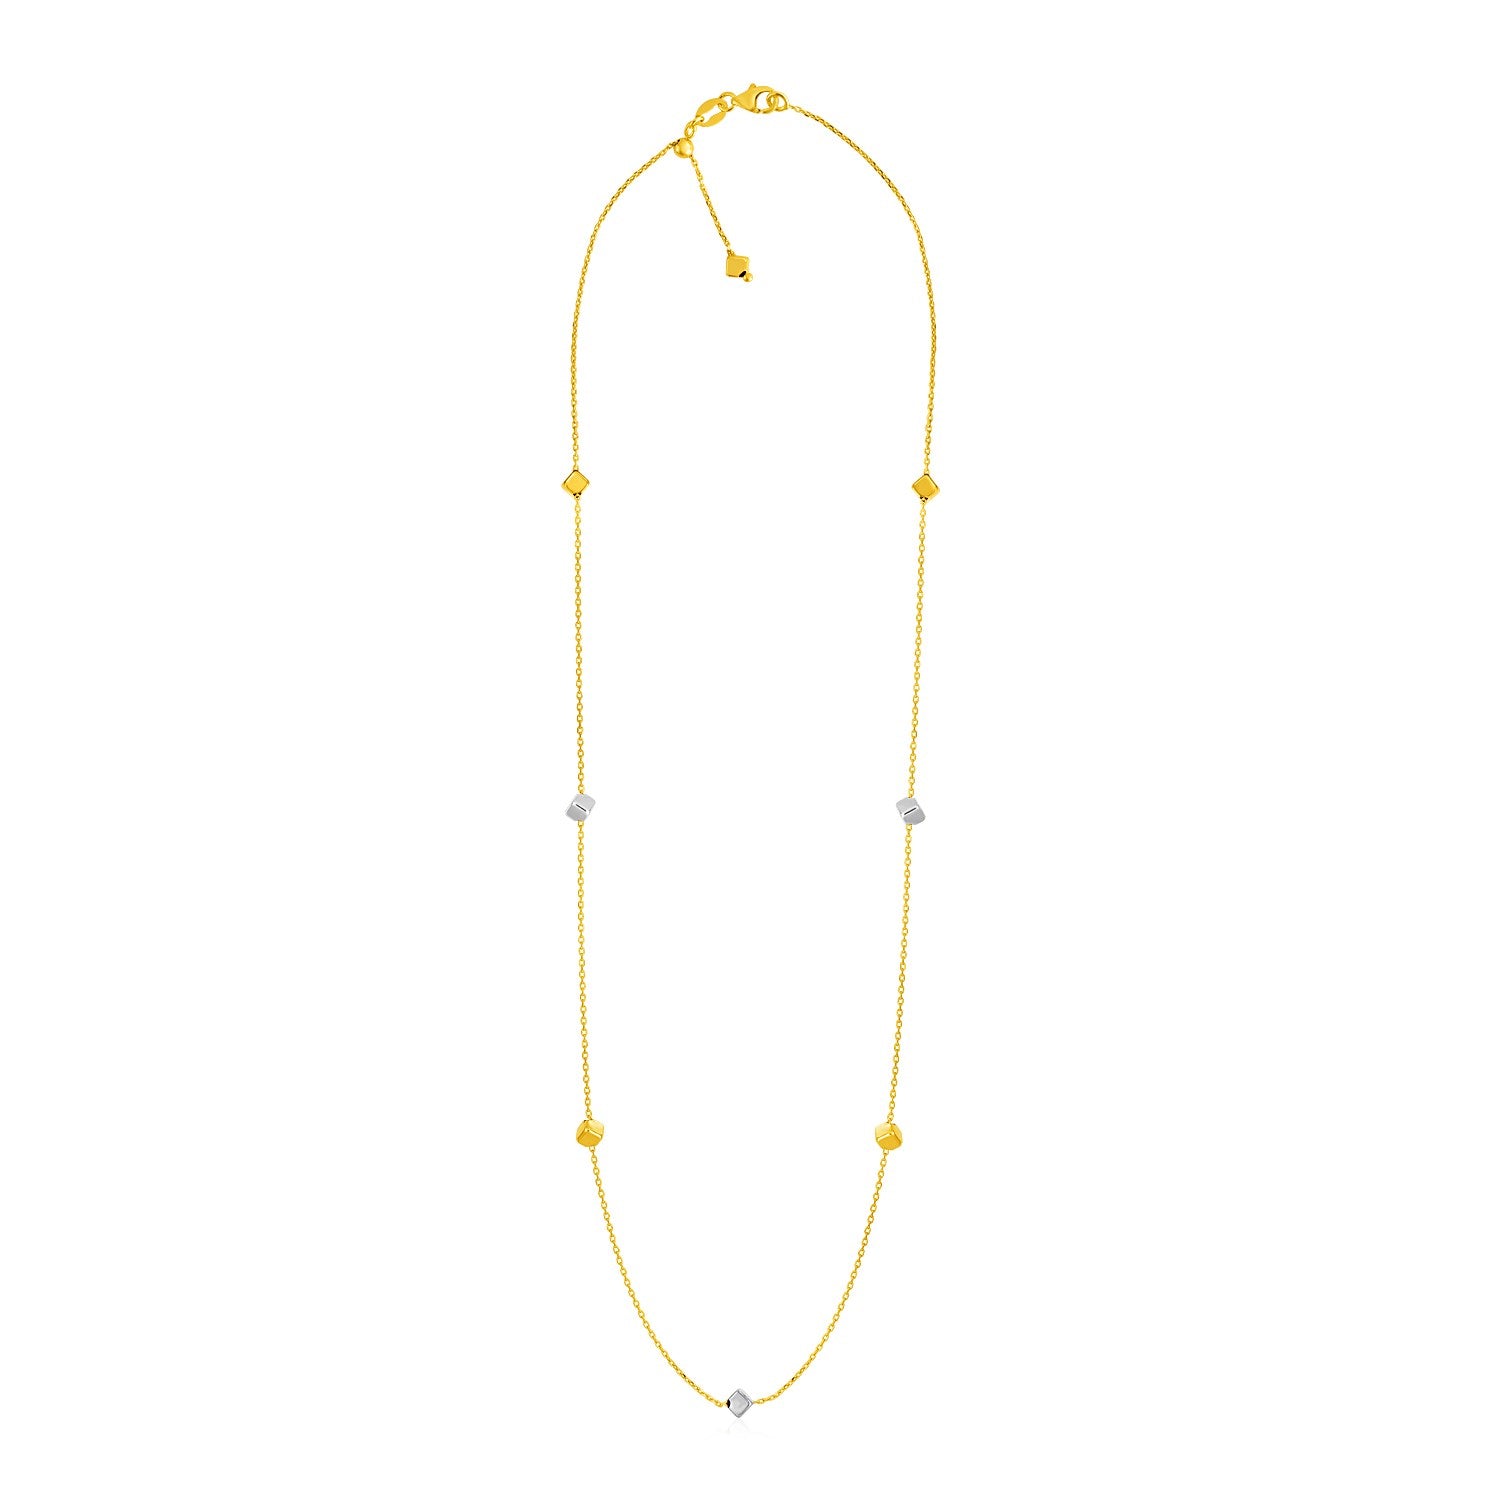 14k Two Tone Gold Necklace with Polished Cubes